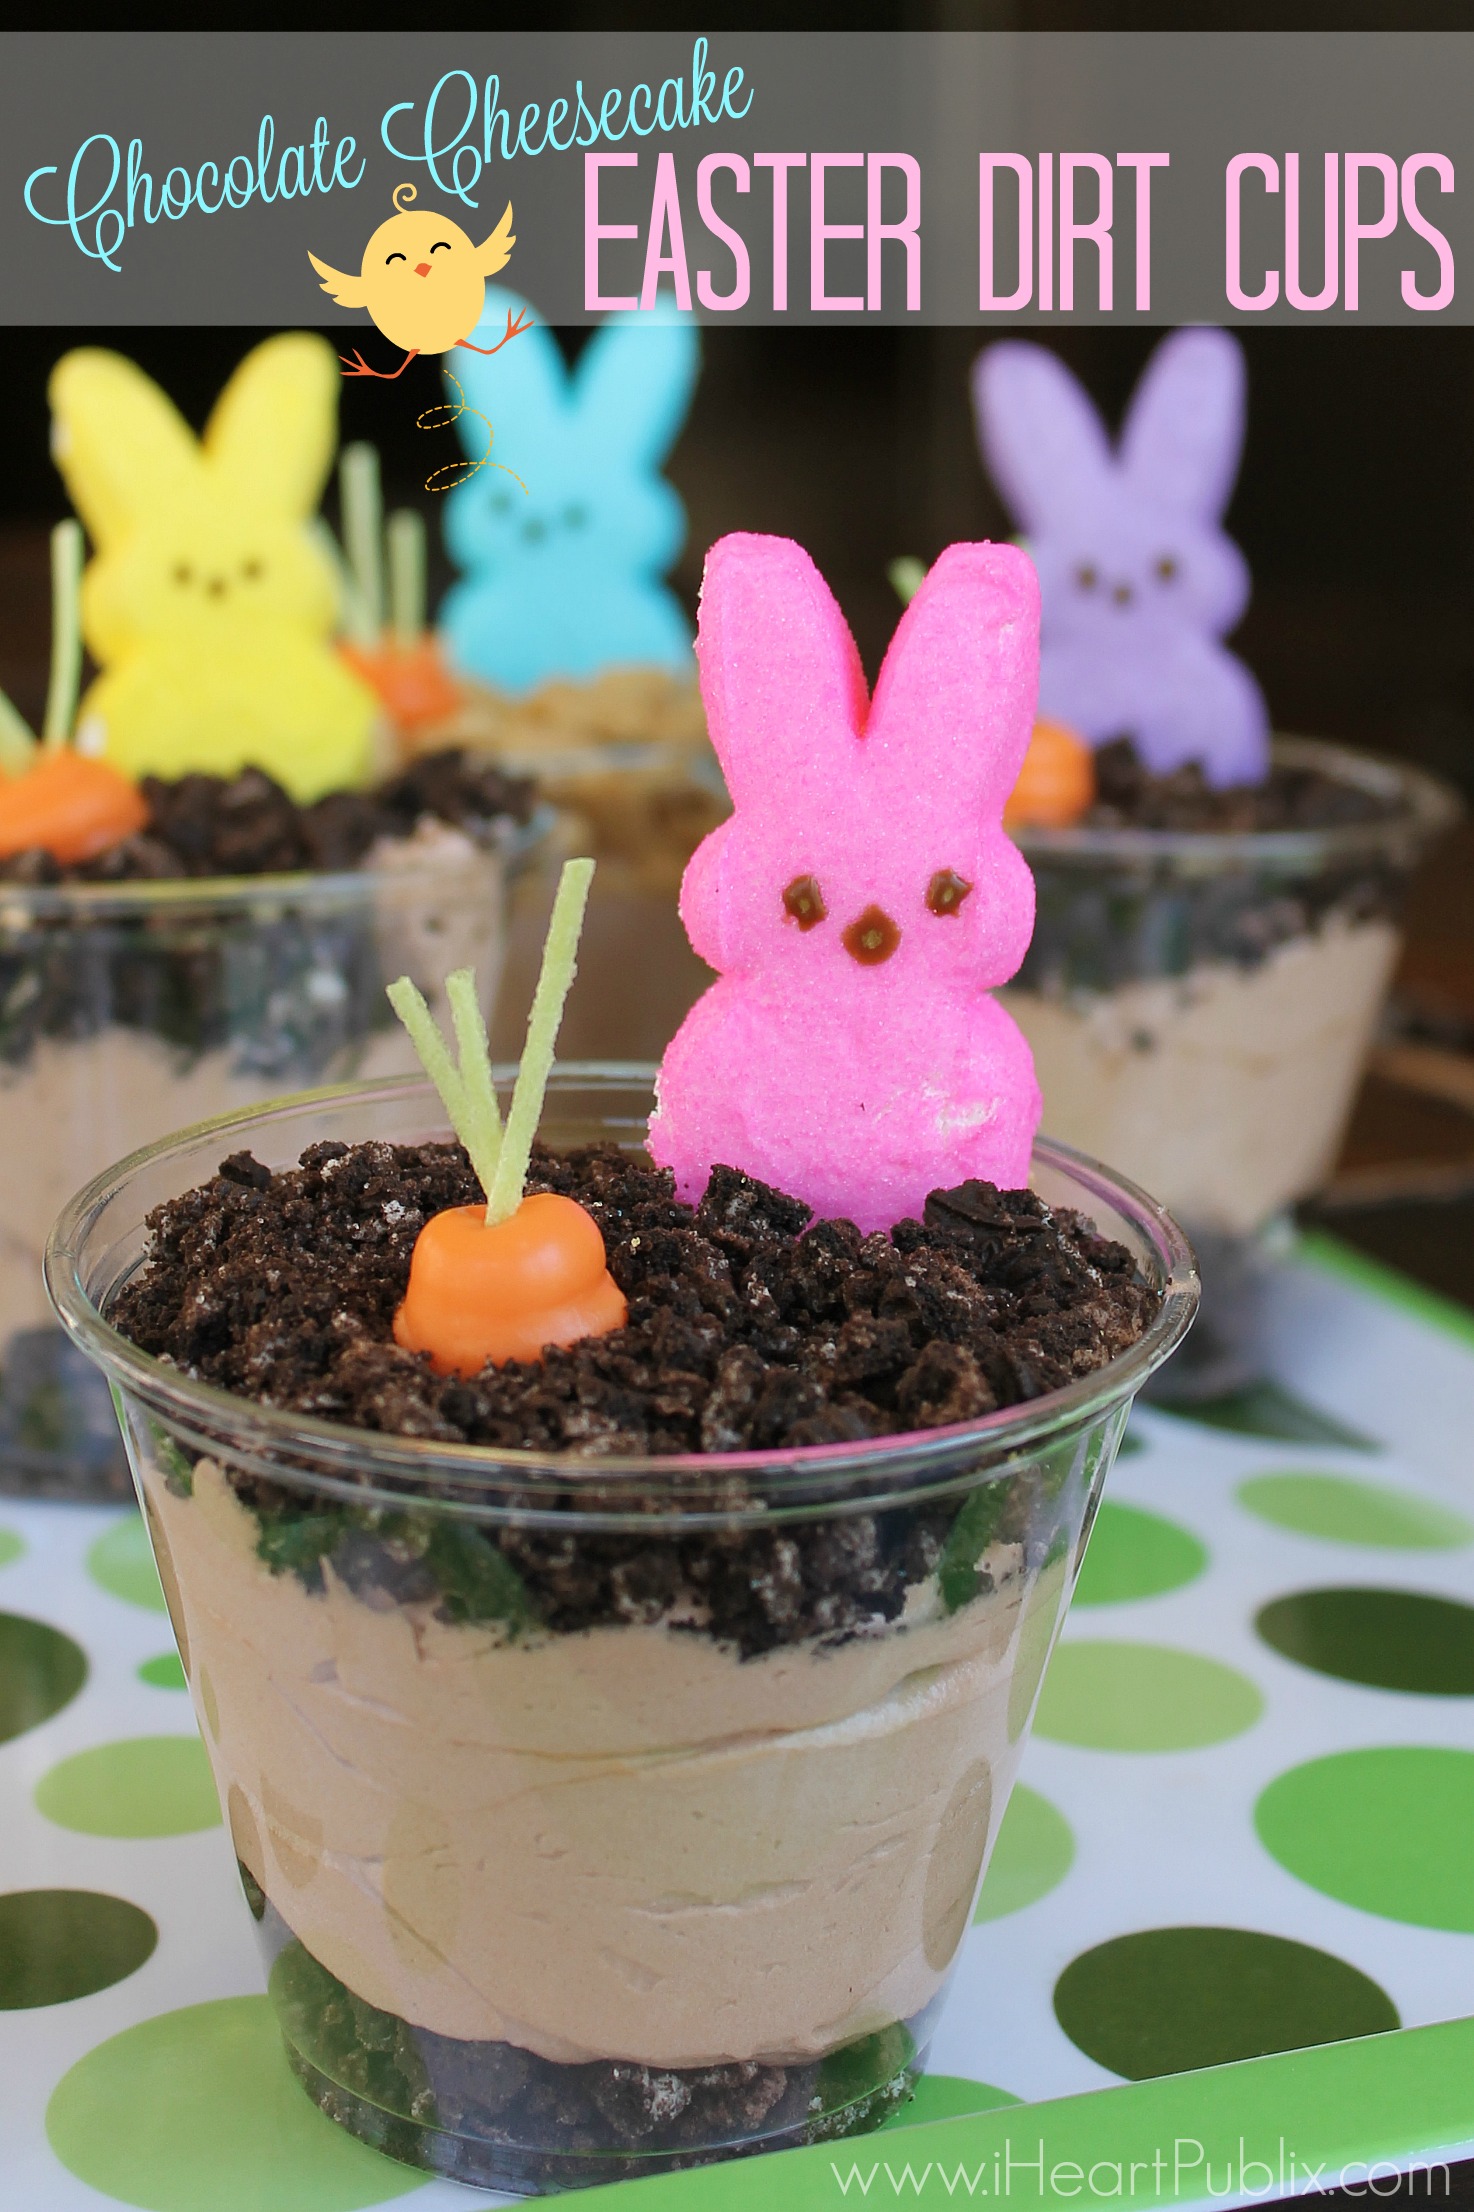 Chocolate Cheesecake Easter Dirt Cups